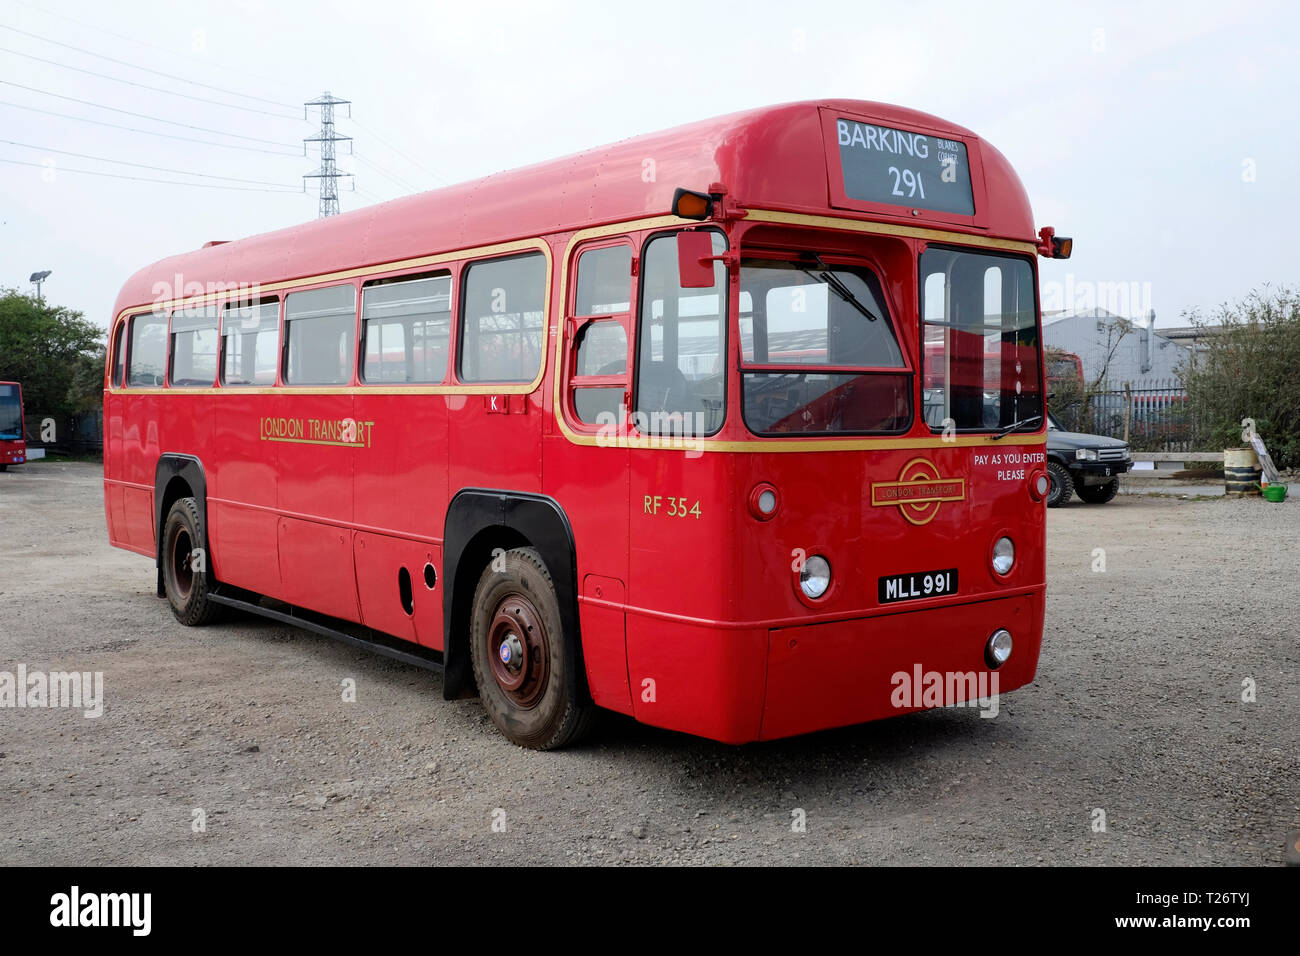 London, UK, 30th March, 2019. London bus museum is running old buses in Barking, and passengers can board them for free. Credit: Yanice Idir / Alamy Live News Stock Photo